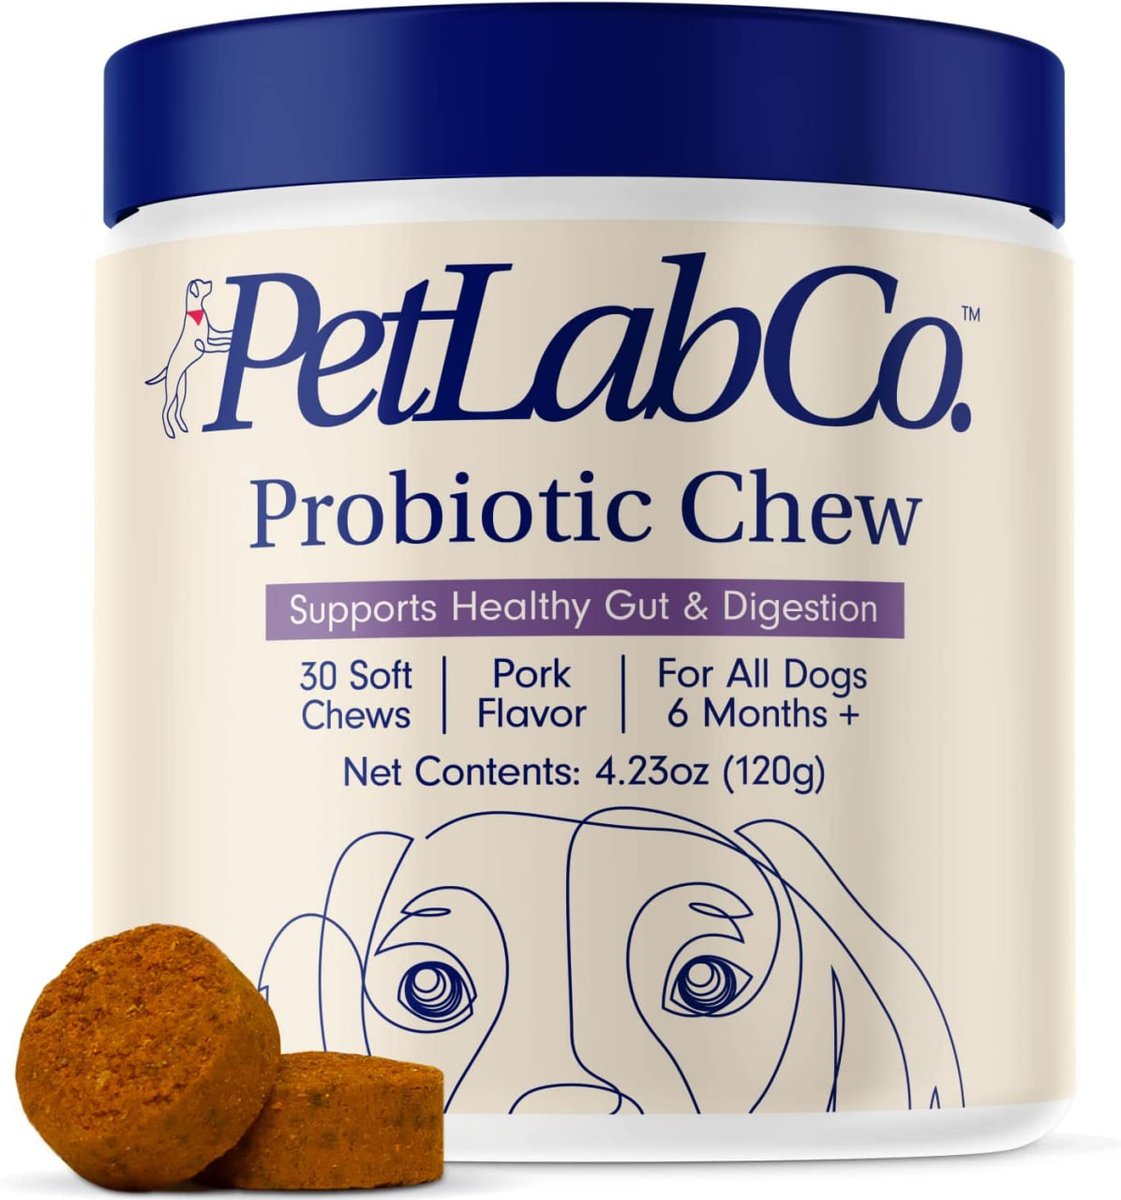 🐾✨ PetLab Co. Probiotics for Dogs Deal Alert! ✨🐾

✅ Deal Price: $35.95
📦 Get extra 15% off with Subscribe & Save

amzn.to/3Ja5Uem

#DealAlert #ProbioticsForDogs #PetHealth #GutHealth #DigestiveBalance #DiscountedPrice #HappyTummy #CanineCompanion